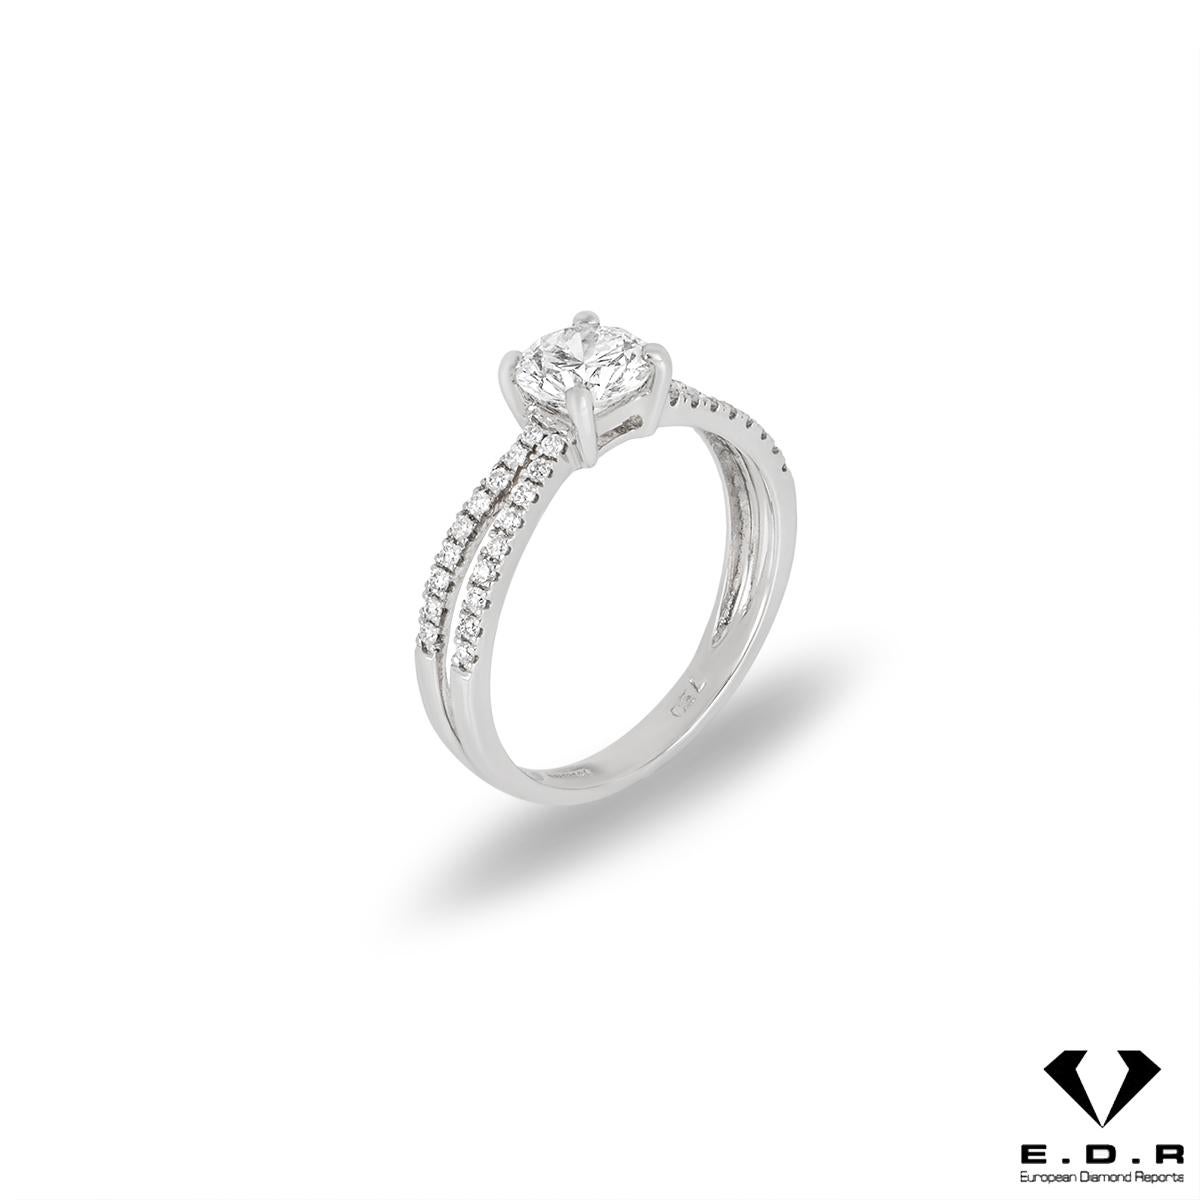 A stunning 18k white gold diamond ring. The ring is set to the centre with a round brilliant cut diamond weighing 0.76ct, E colour and VS1 clarity. The diamond is accentuated by a split shank consisting of pave set round brilliant cut diamonds